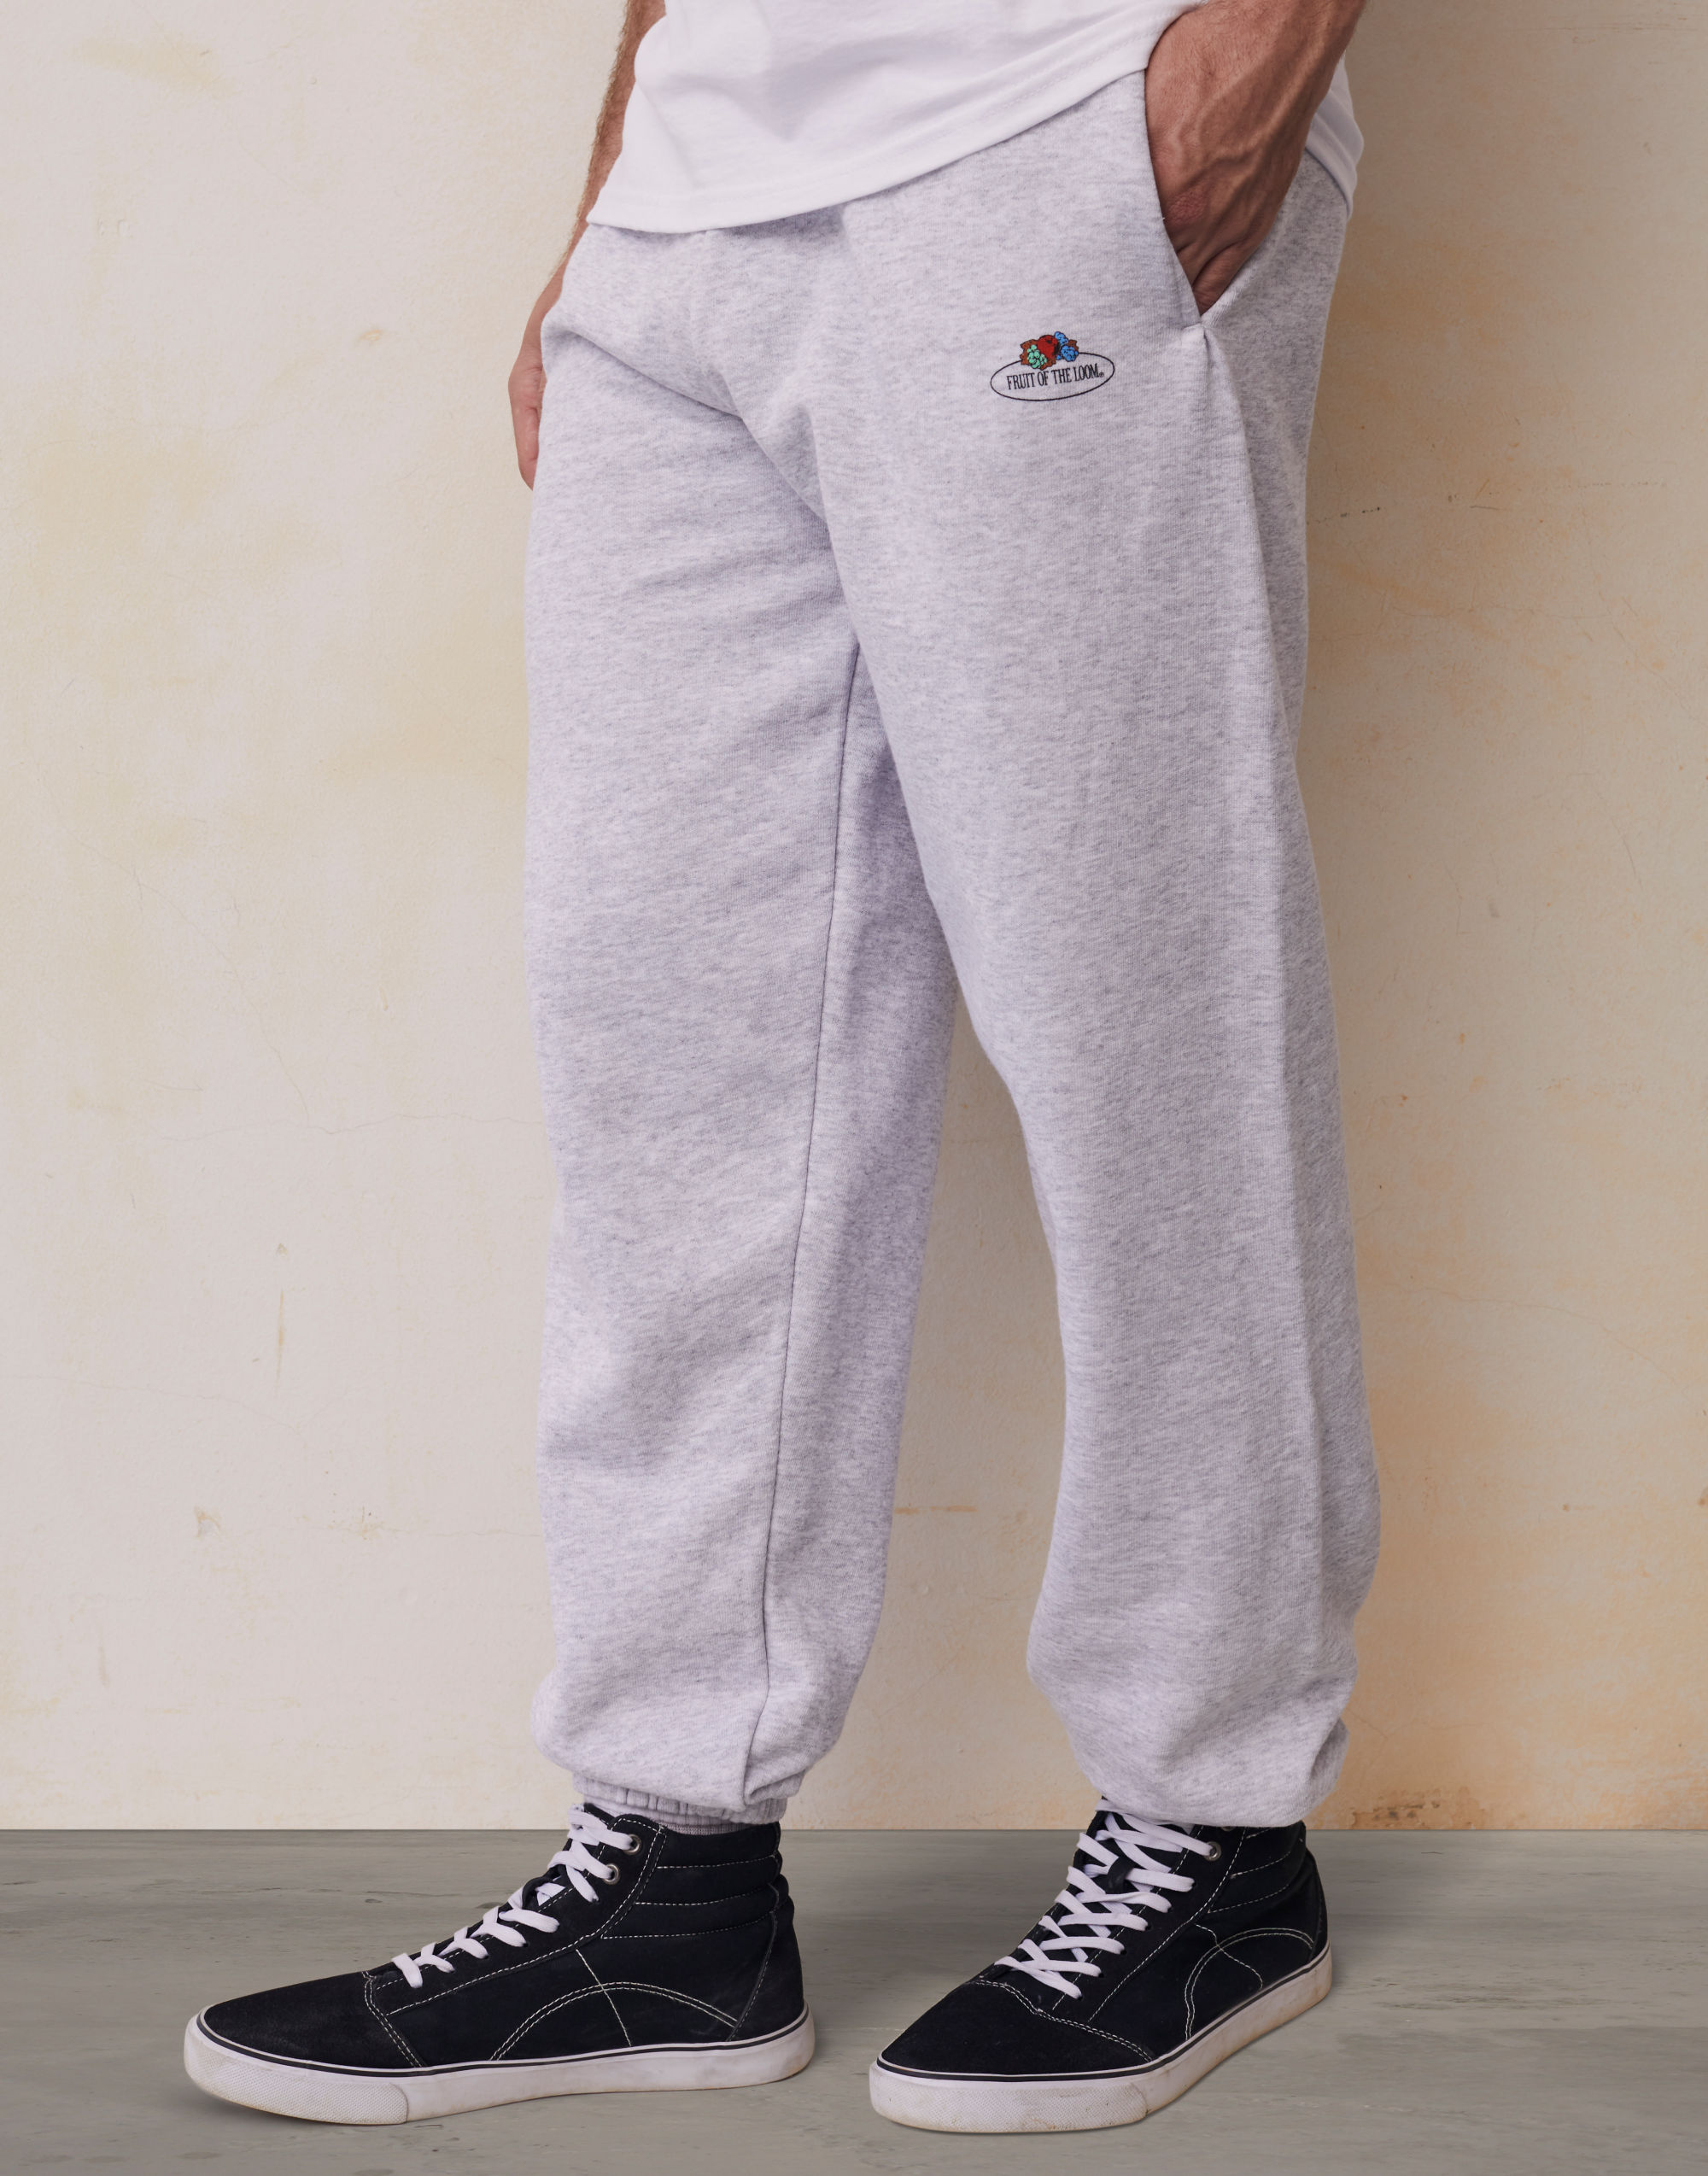 Vintage Elasticated Cuff Jog Pants with Small Logo